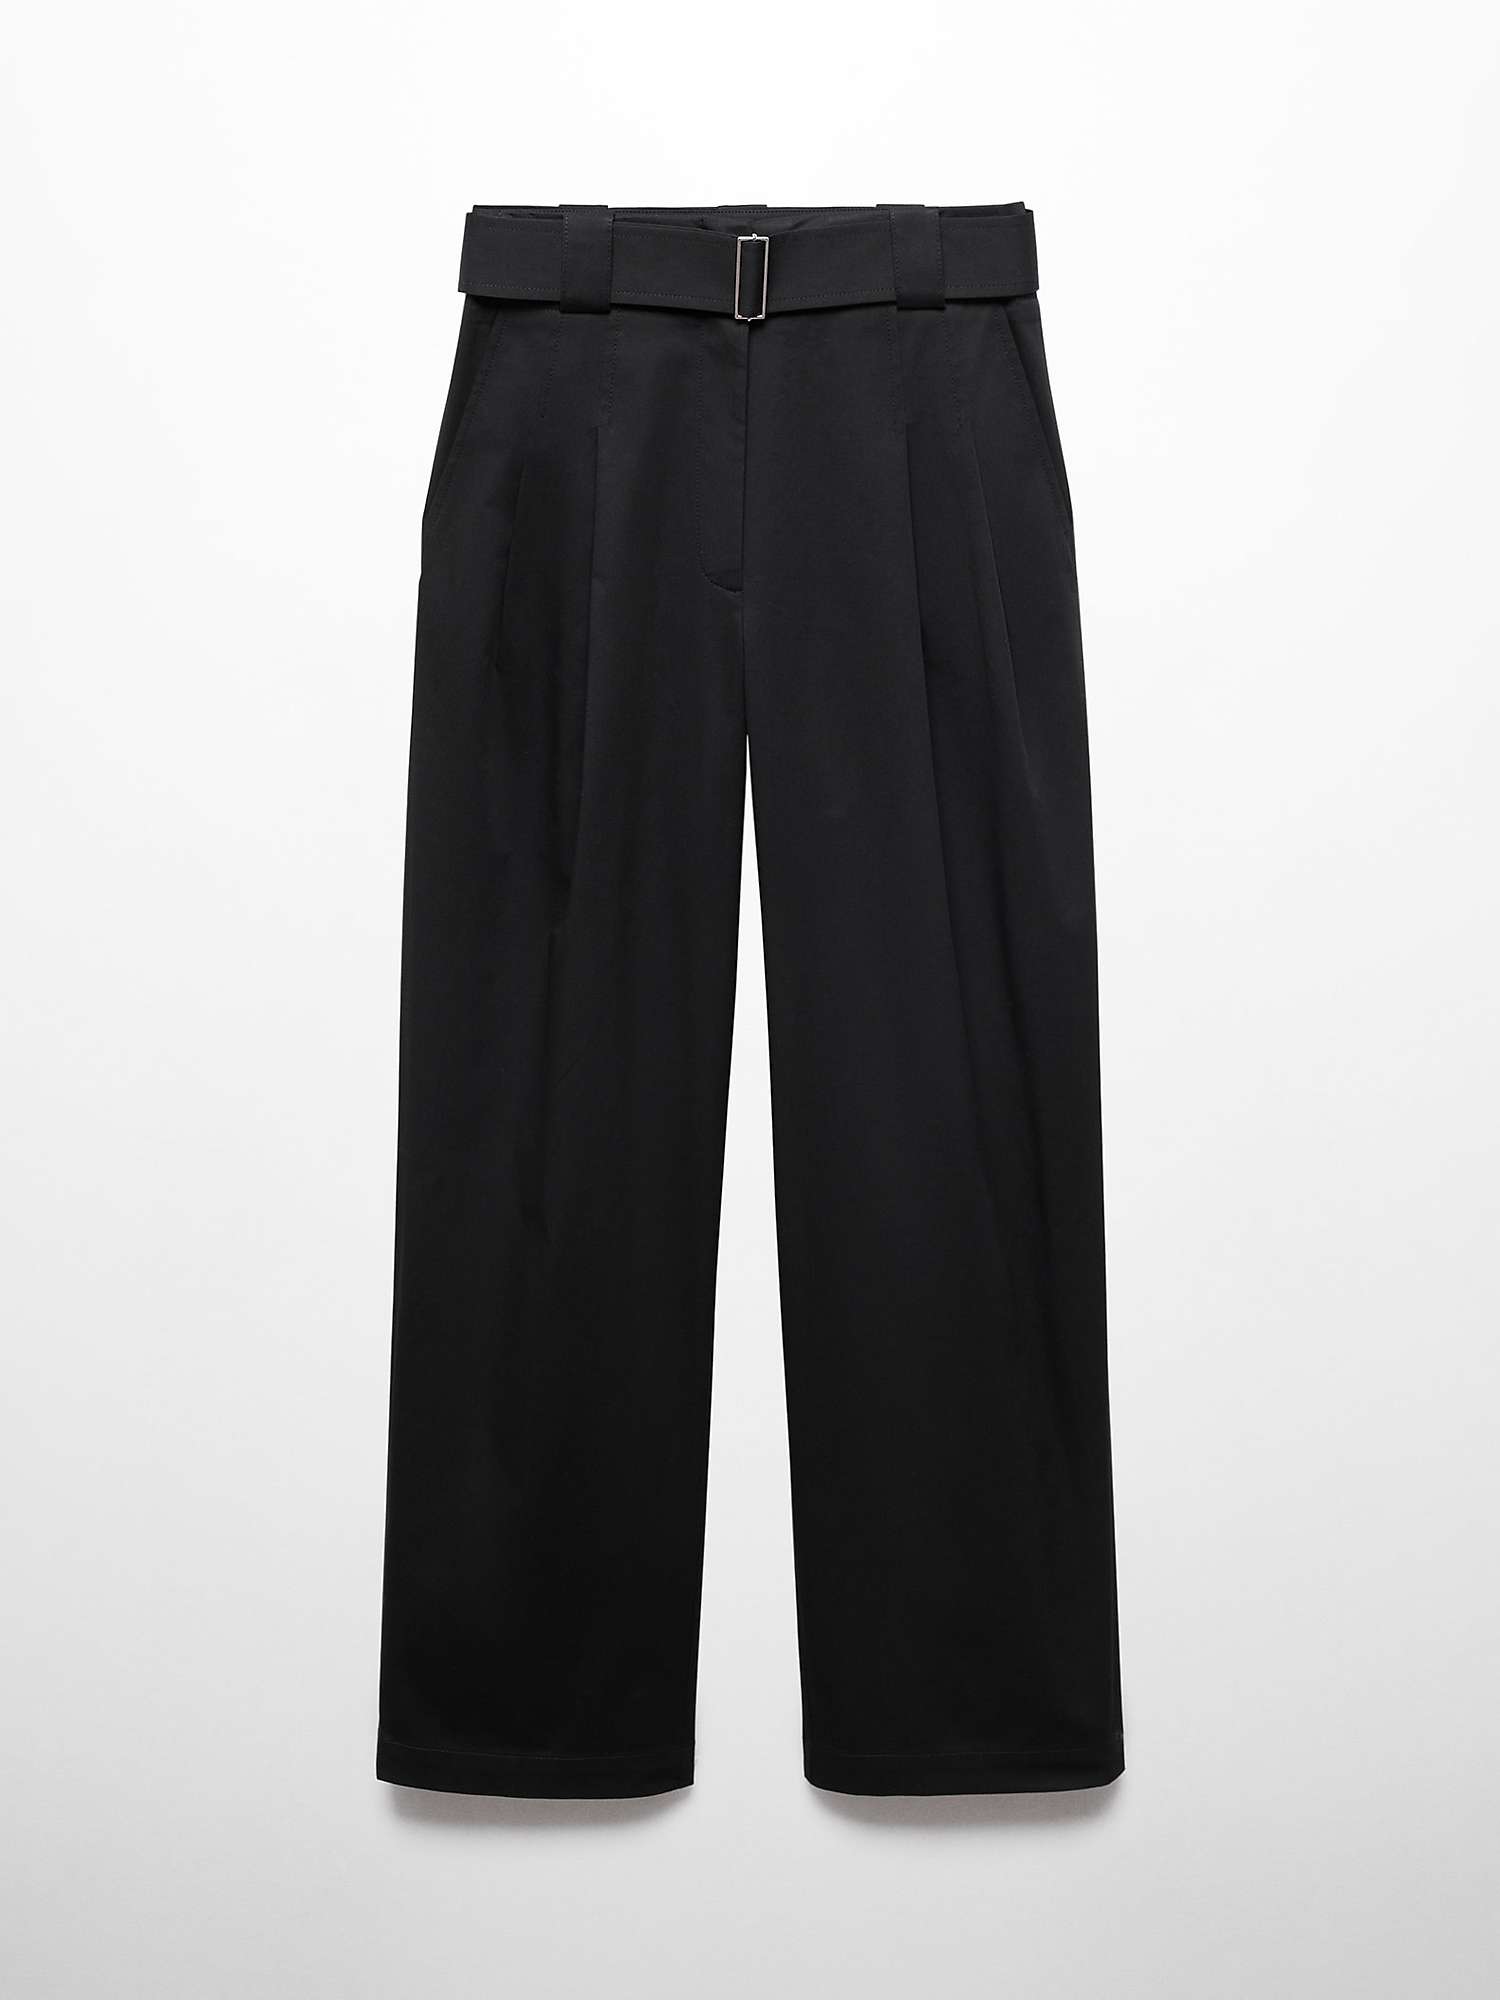 Buy Mango Myriam Belted Straight Trousers Online at johnlewis.com